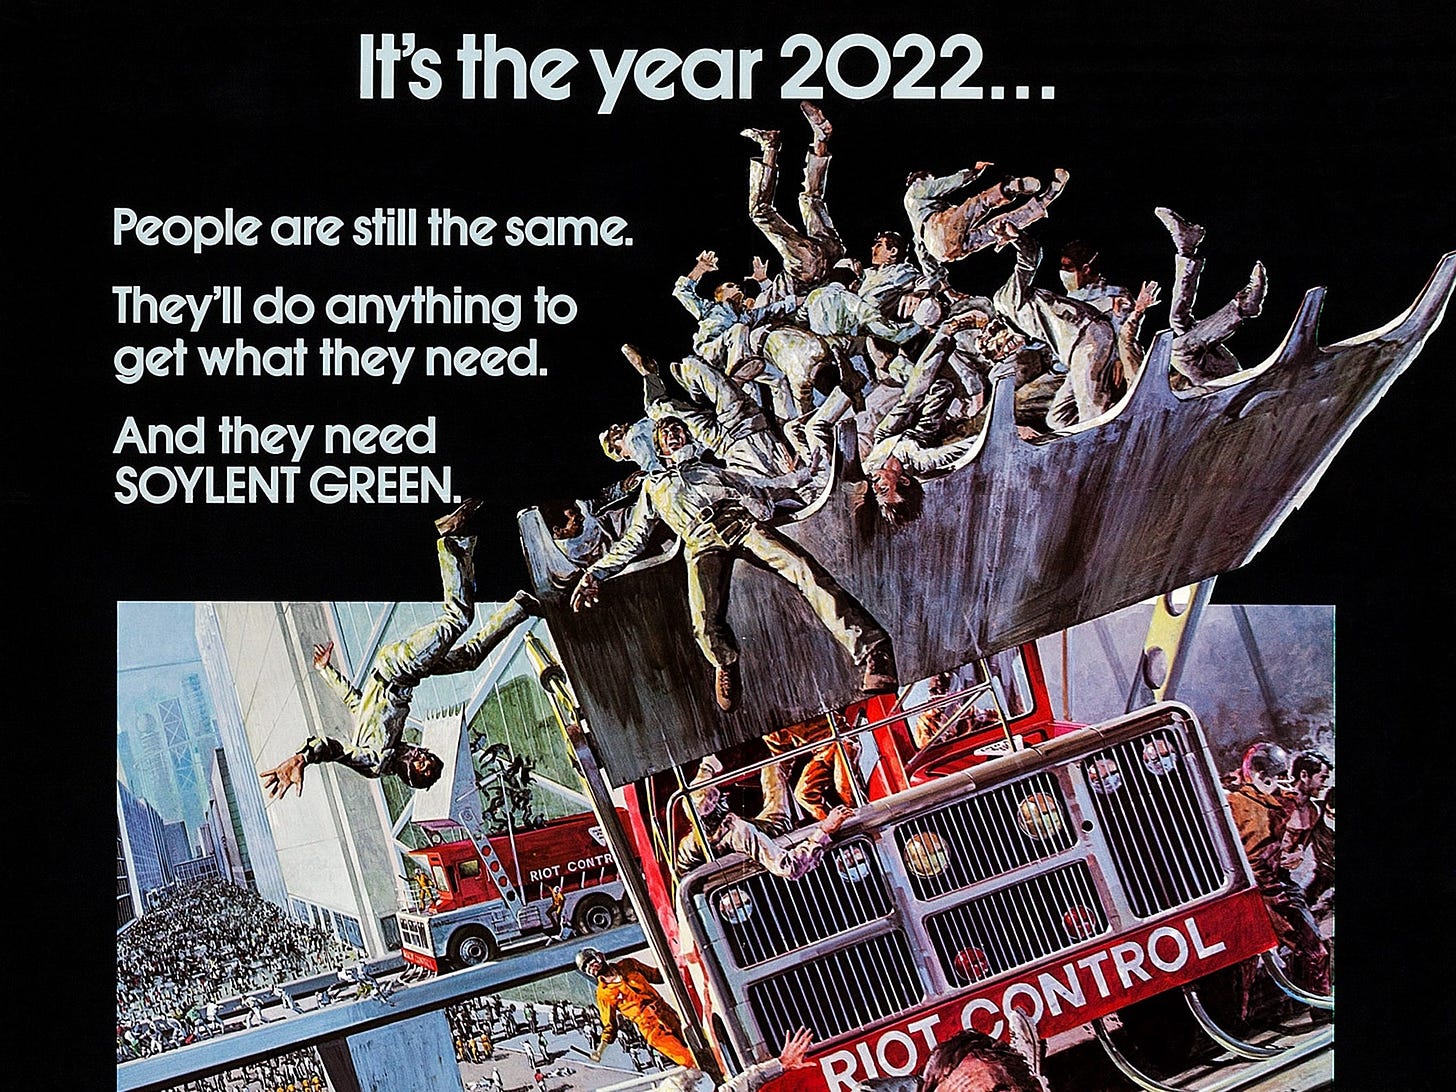 Soylent Green' (1973) predicted the world in 2022: climate change,  inequality - The Washington Post